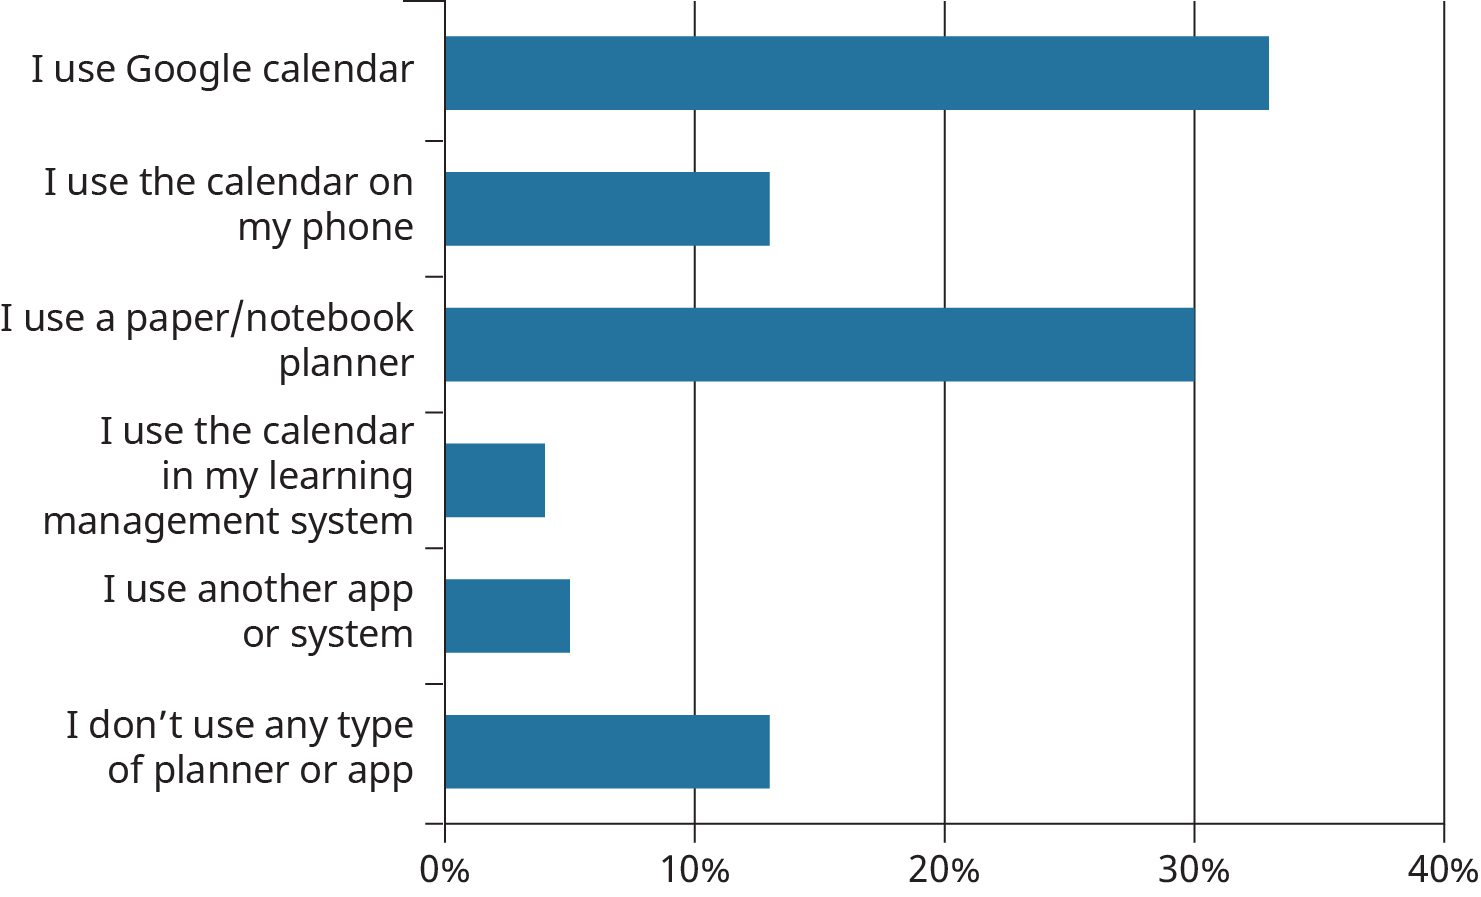 About 33% use Google Calendar, 30% use a paper/notebook planner, 13% use the calendar on their phone or no type of app at all, 6% use another app/system, and 5% use the calendar in their learning management system.